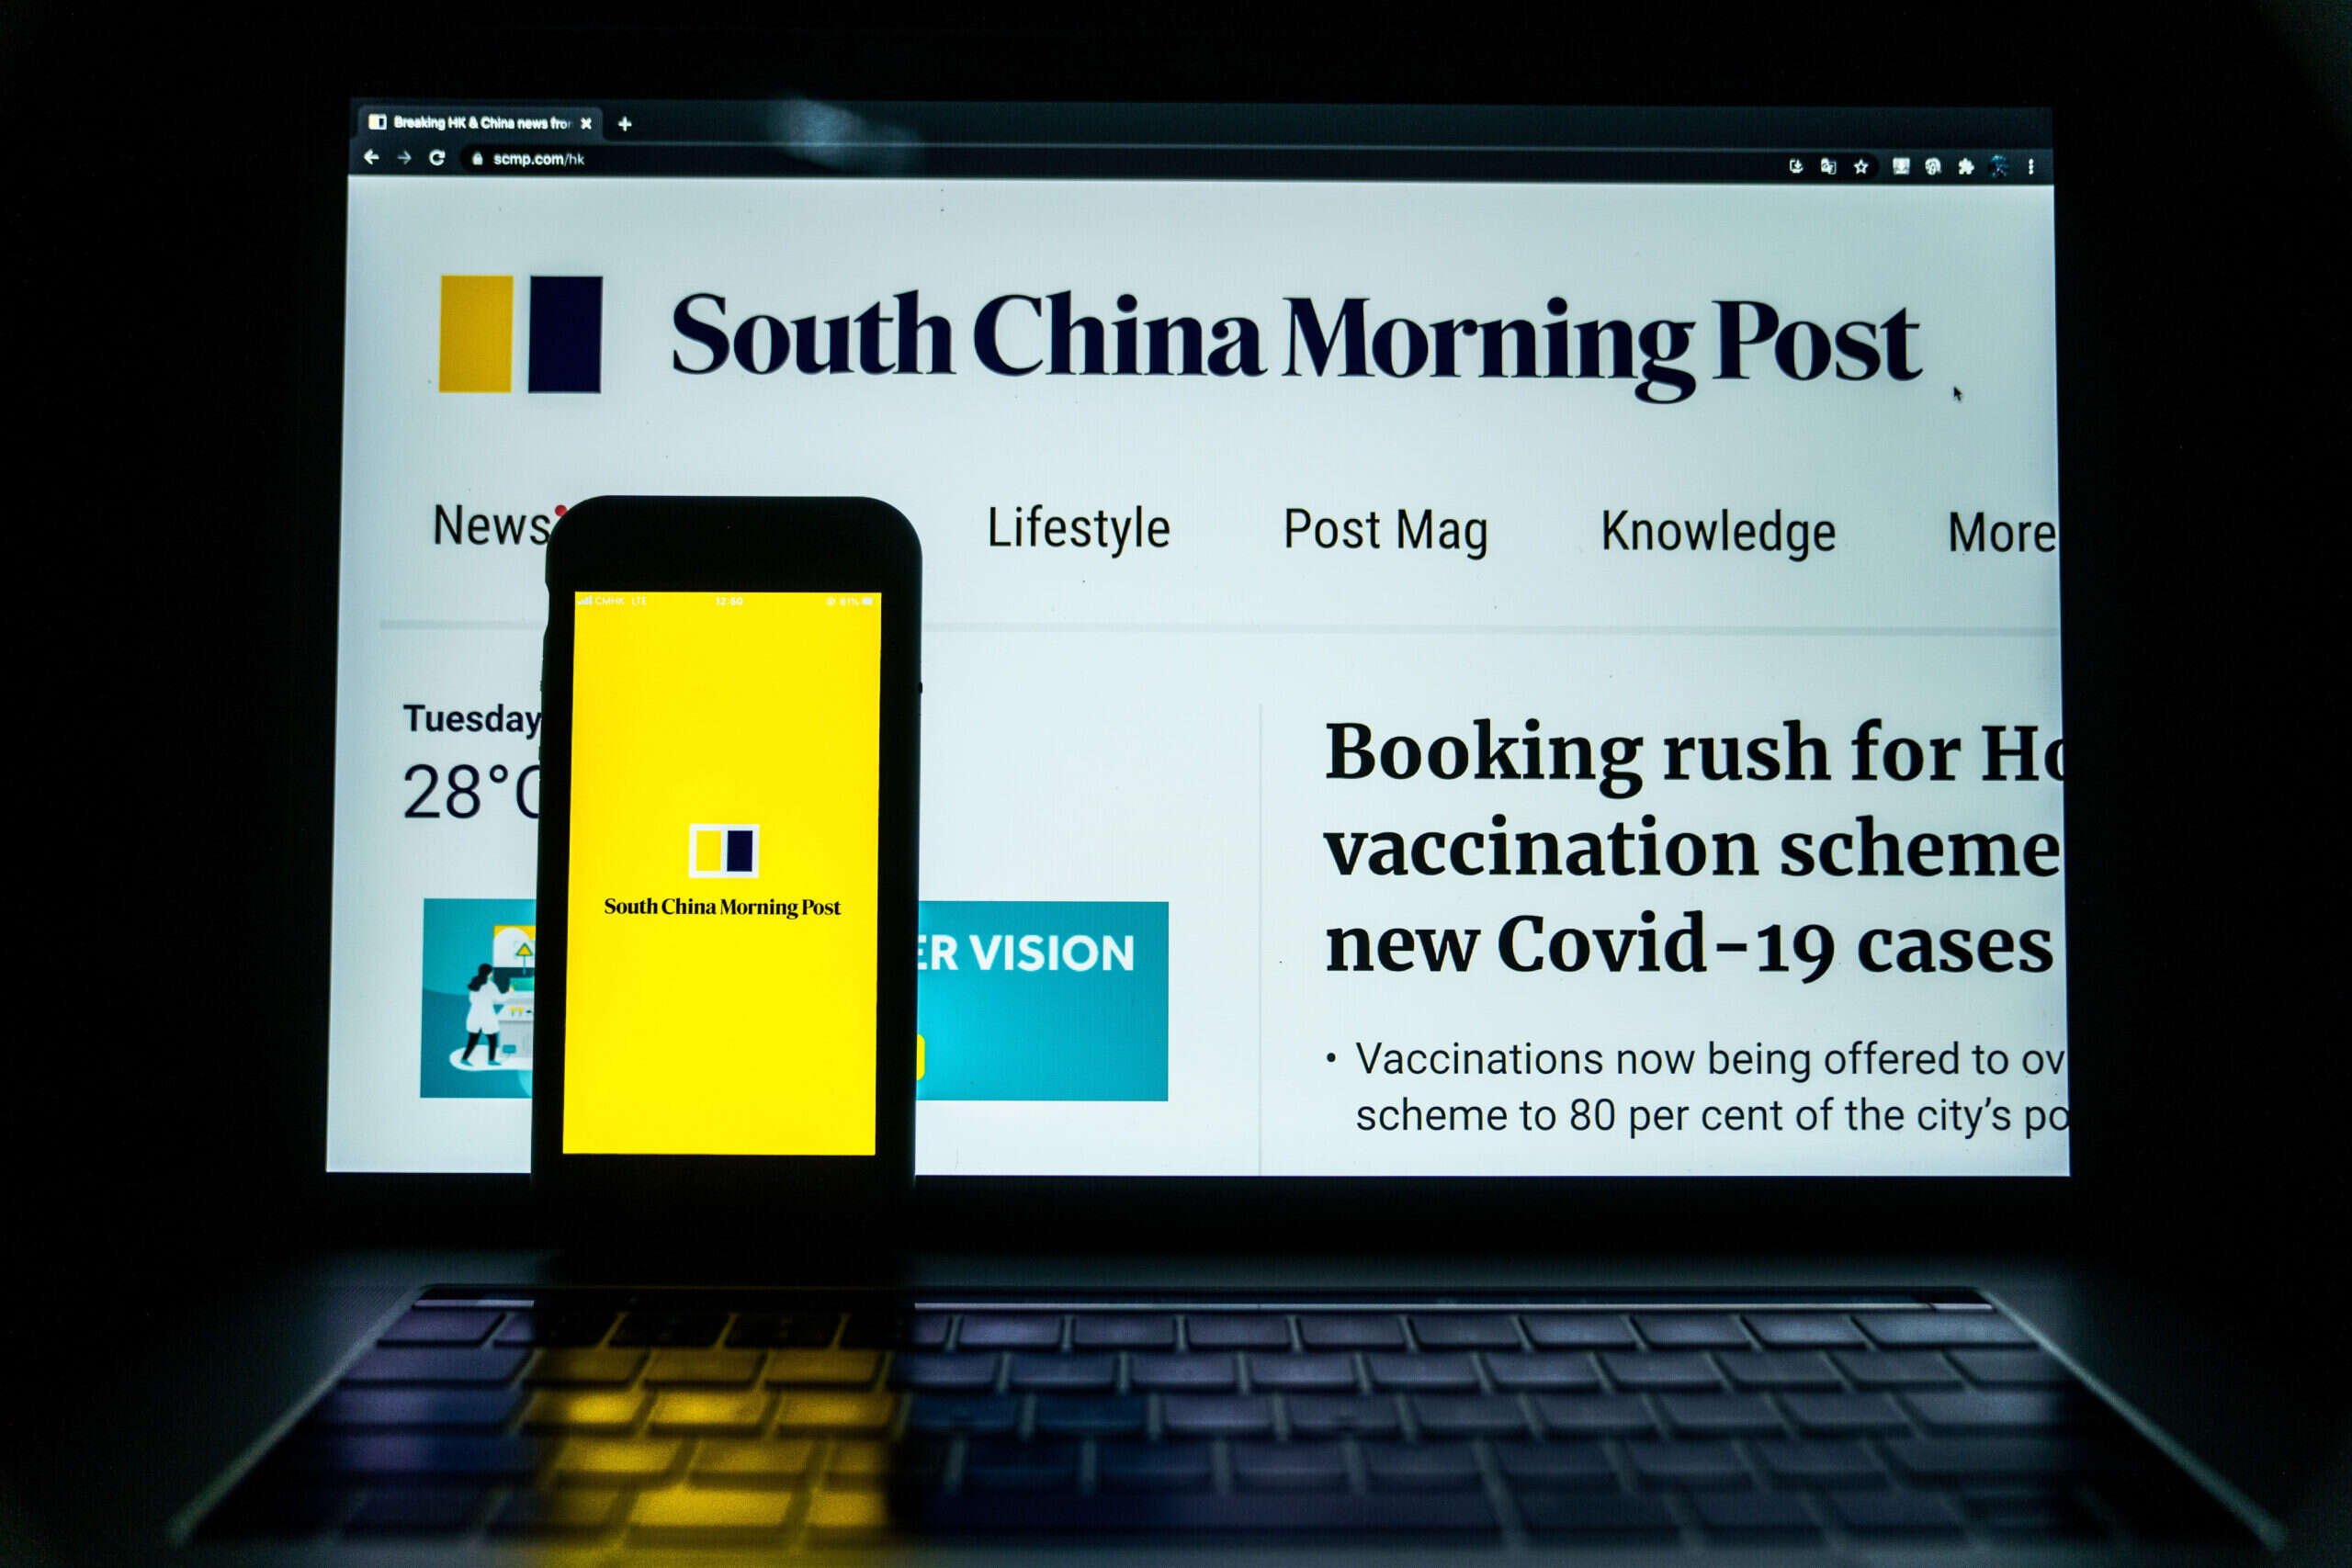 South China Morning Post sells £100,000 worth of NFTs in two hours